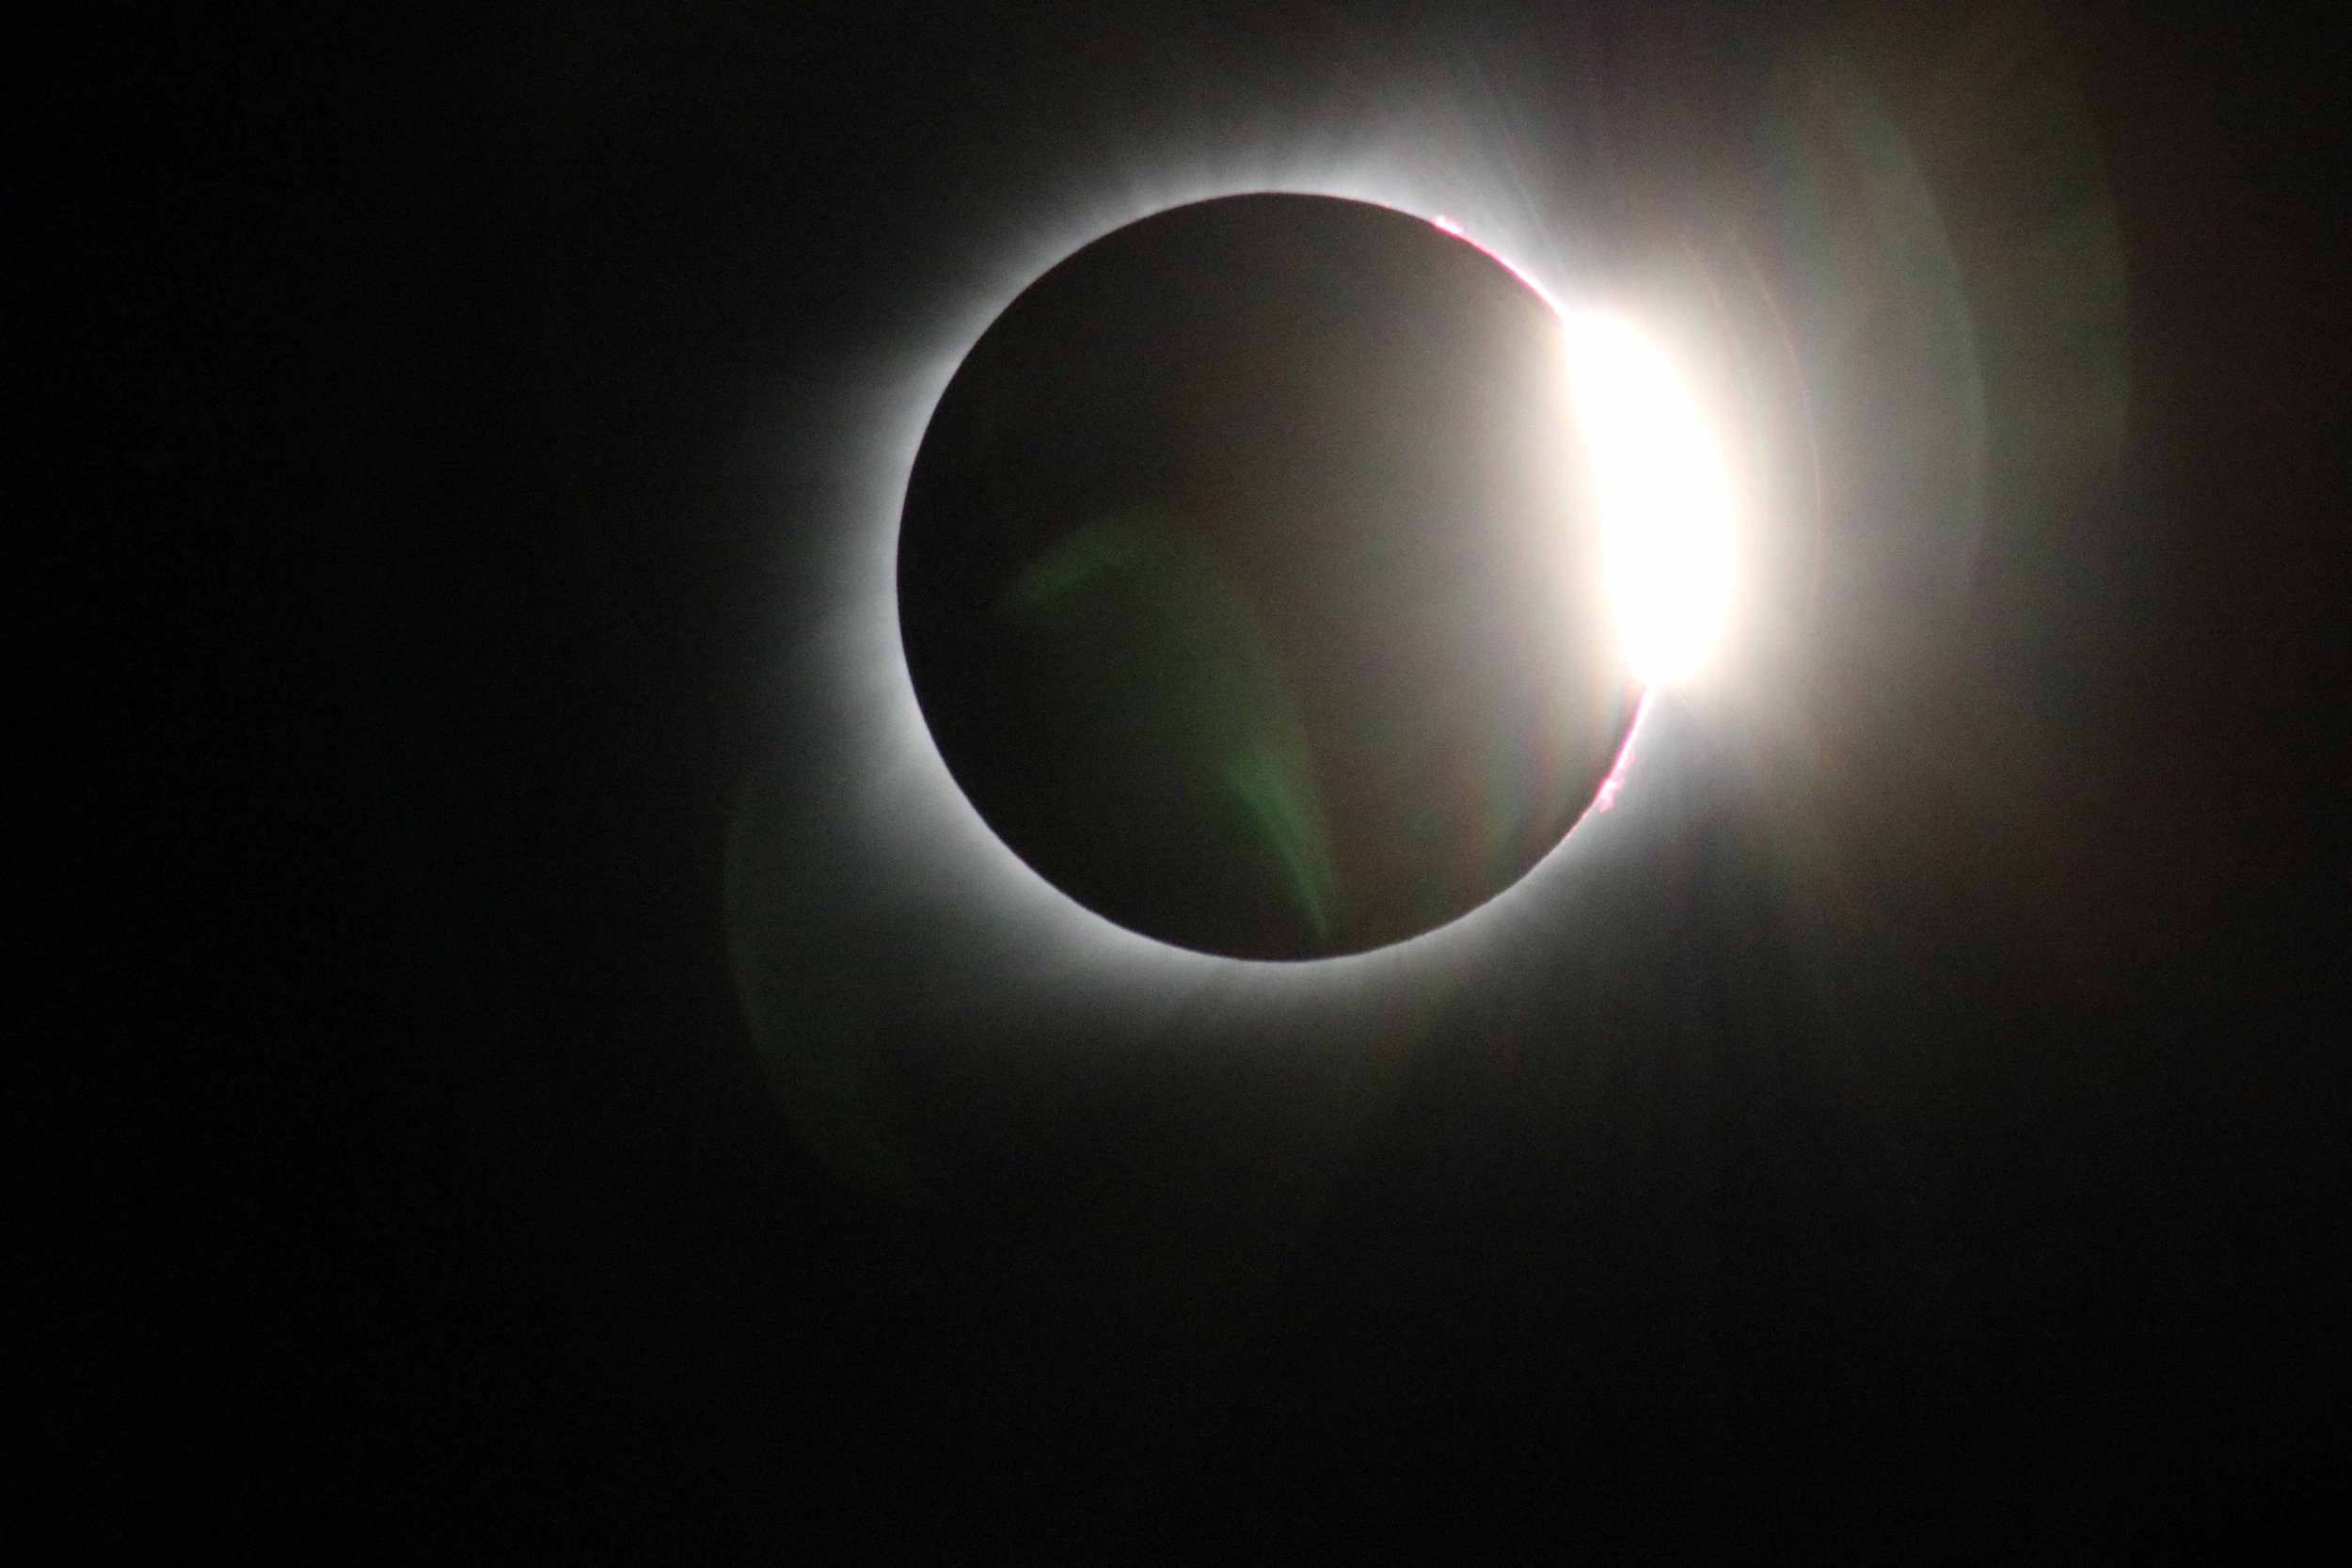   The diamond ring signaling the end of totality is visible in this image of the Aug. 21, 2017, total solar eclipse from Madras, Oregon. Credit: NASA/Gopalswamy  